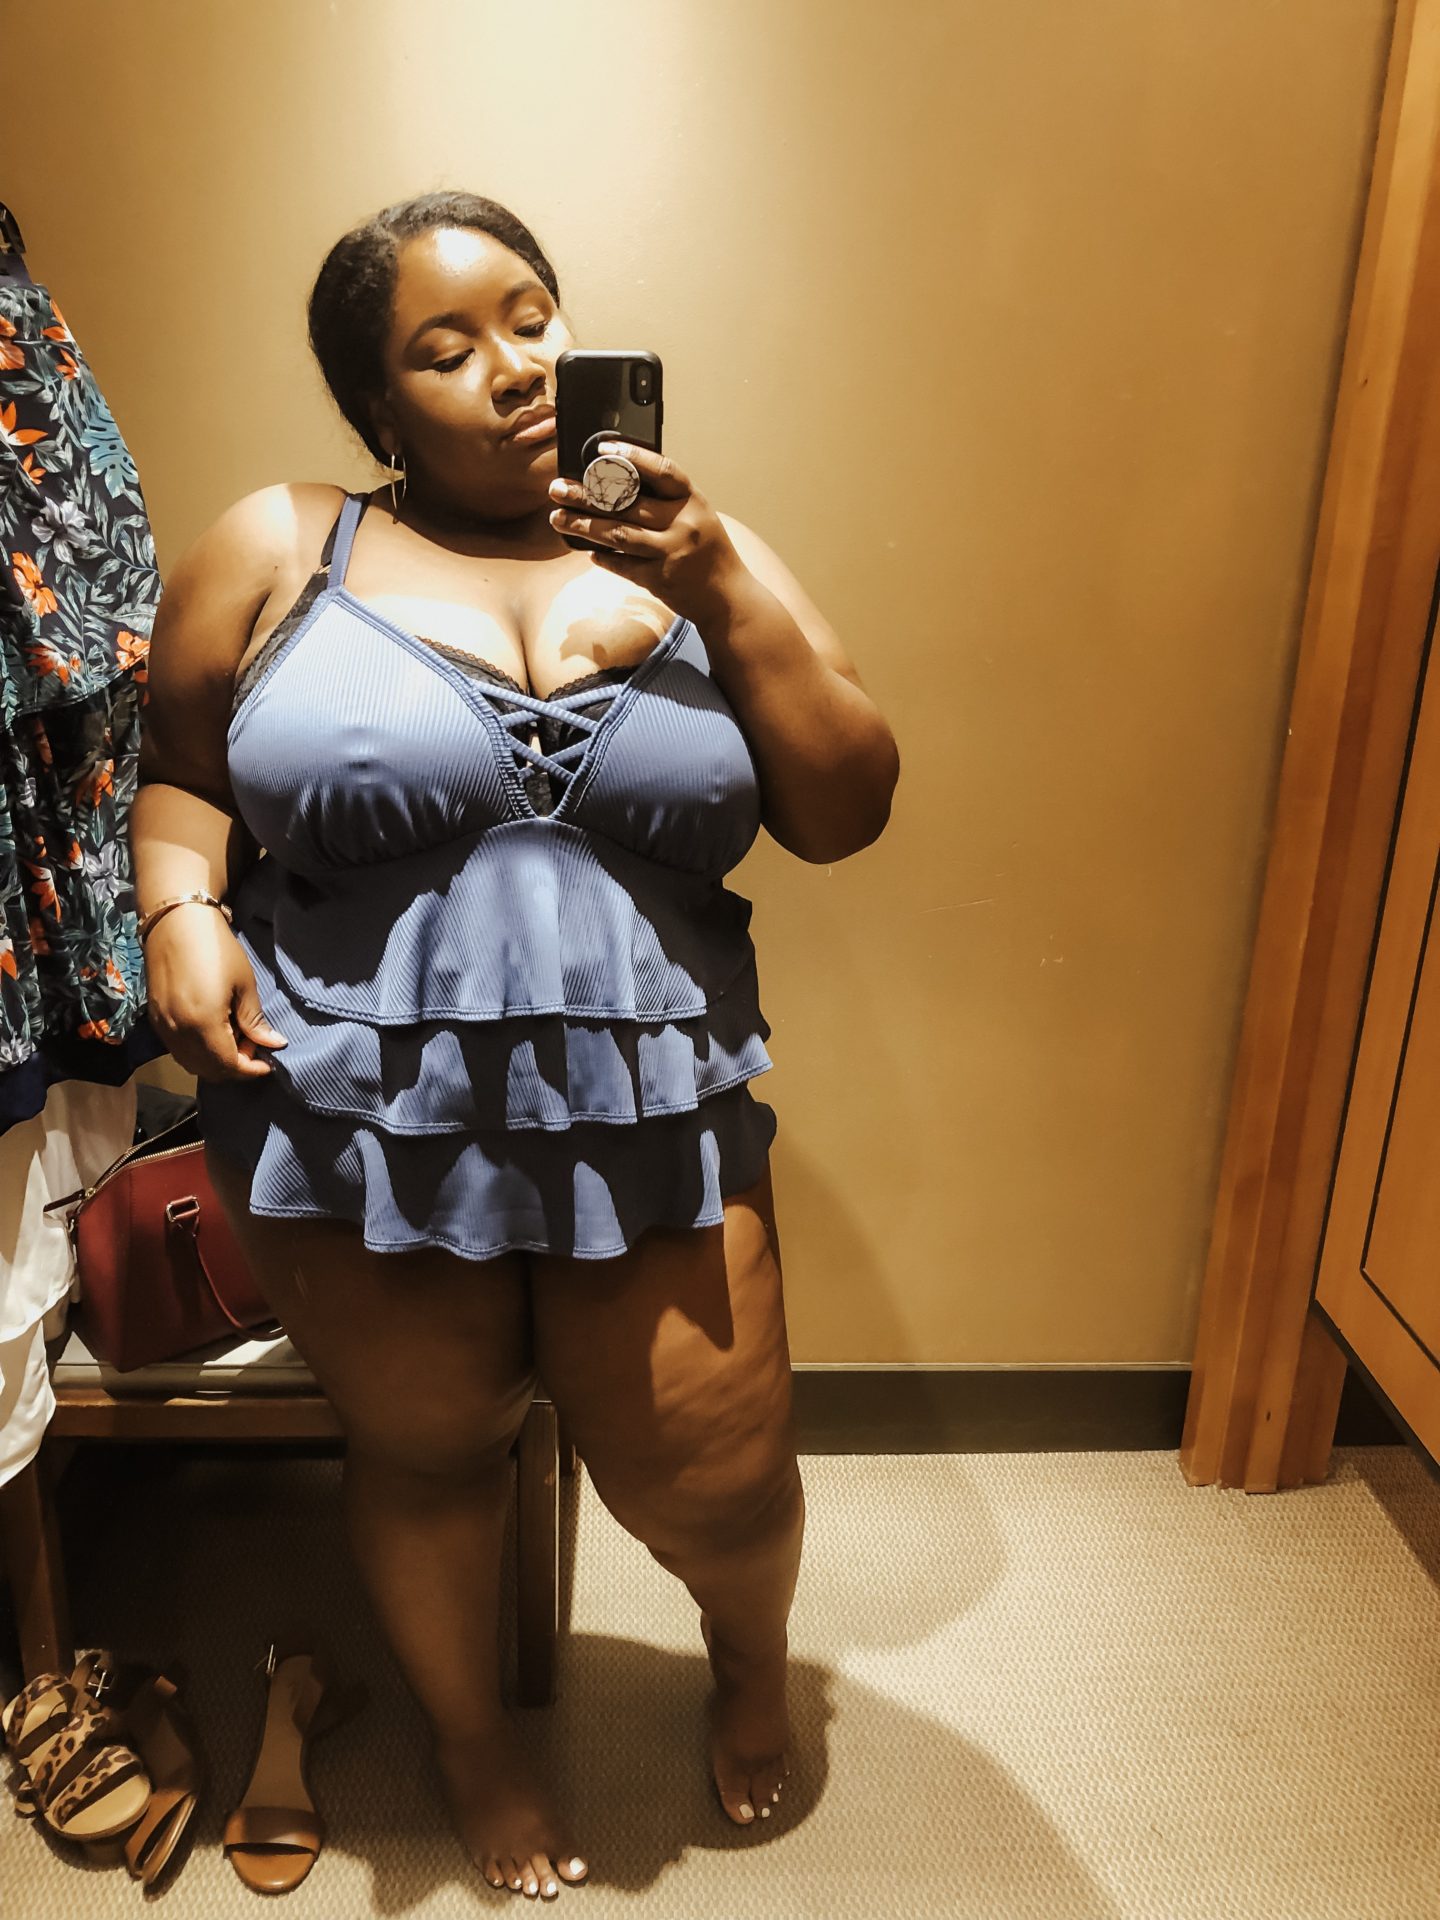 Plus Size Swimsuits for Summer & Body Insecurities - From Head To Curve